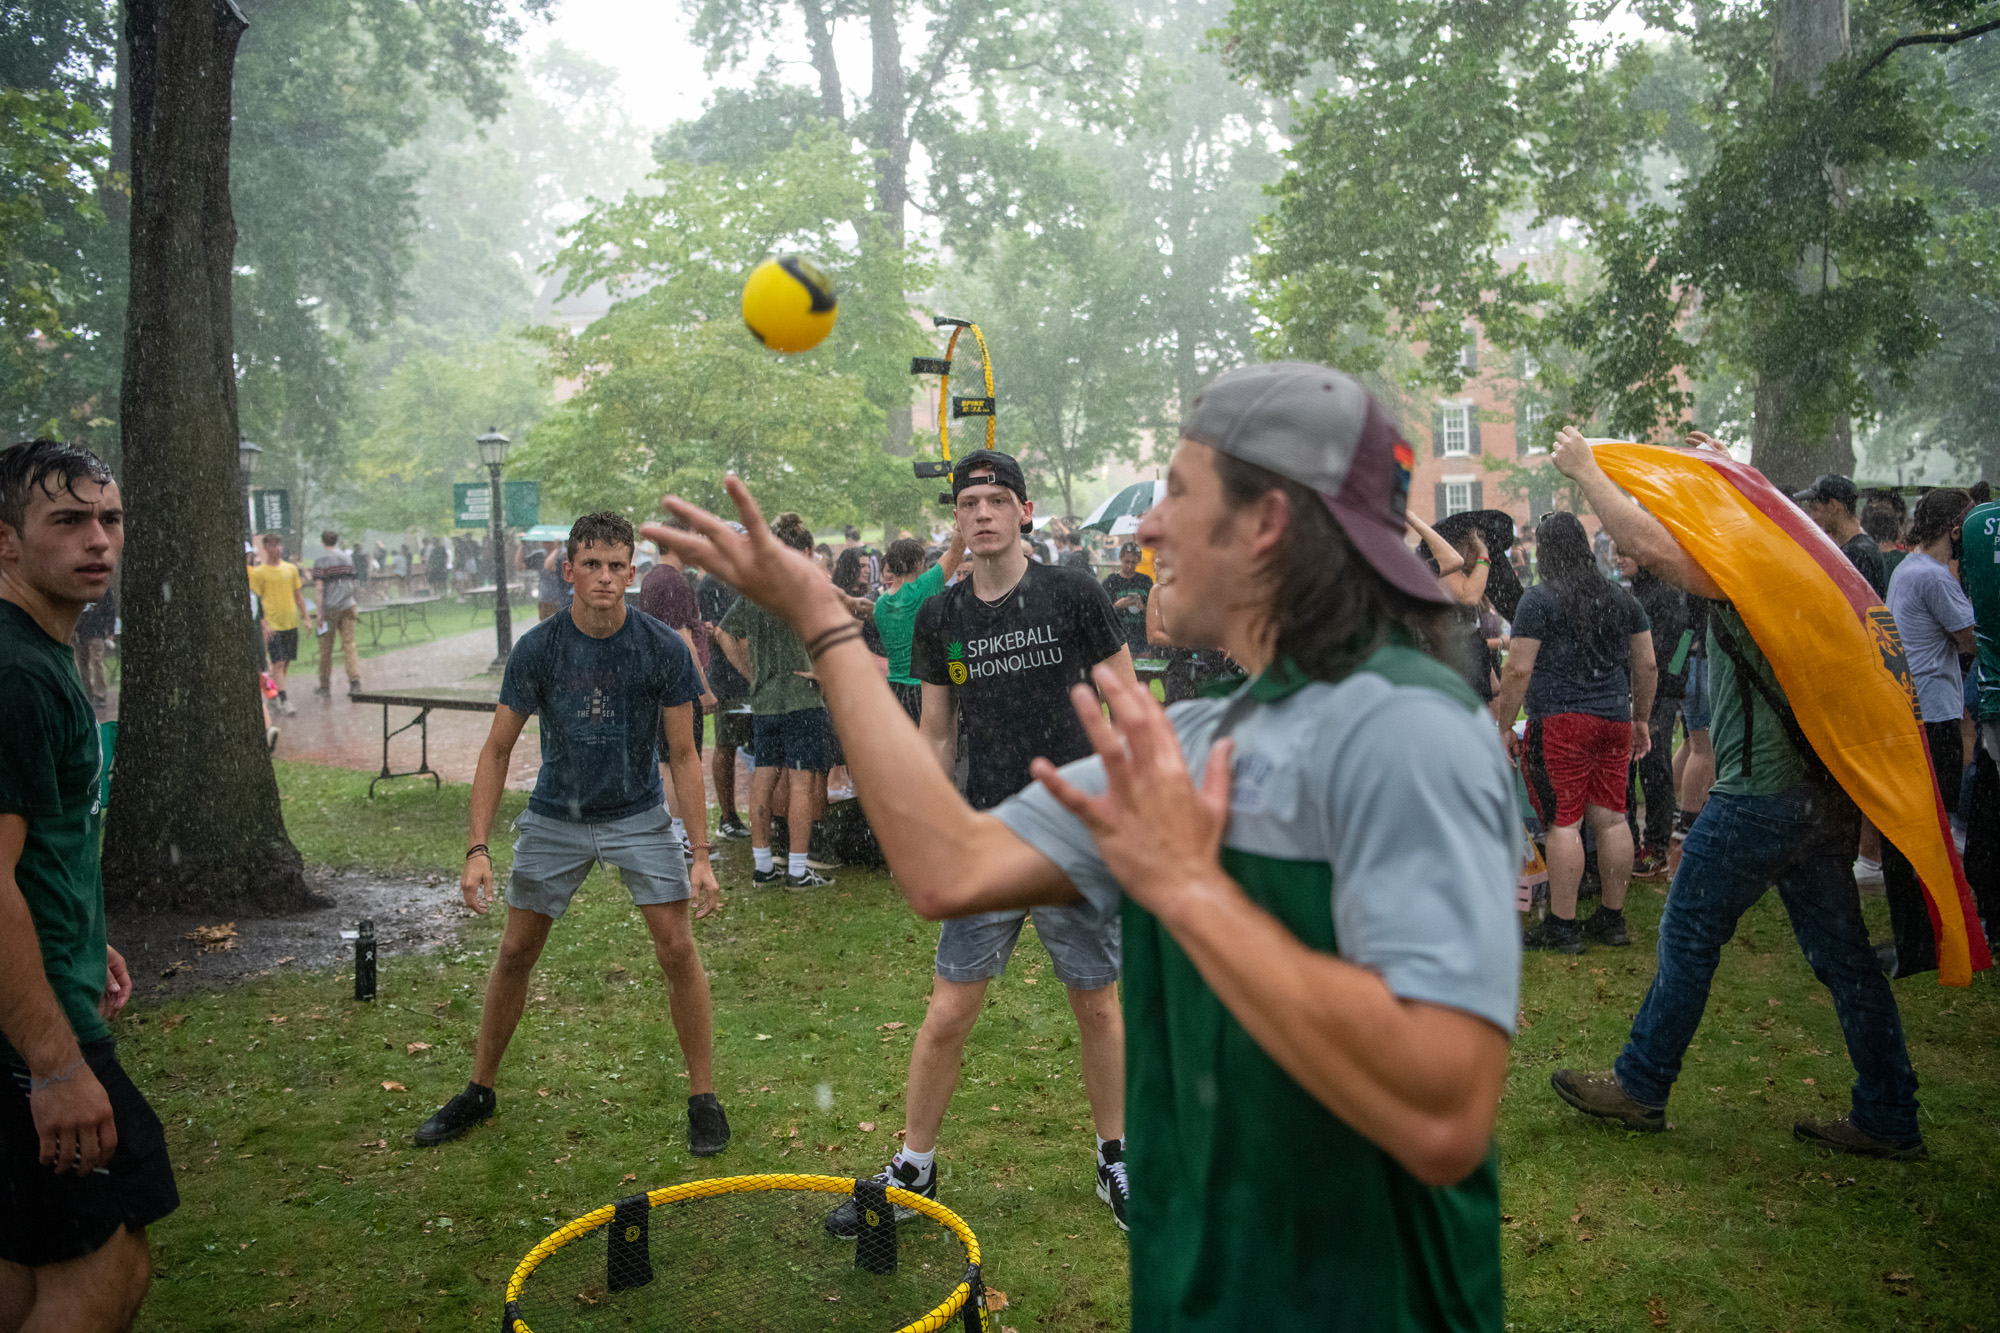 Students enjoy a game of spike ball in the rain on College Green